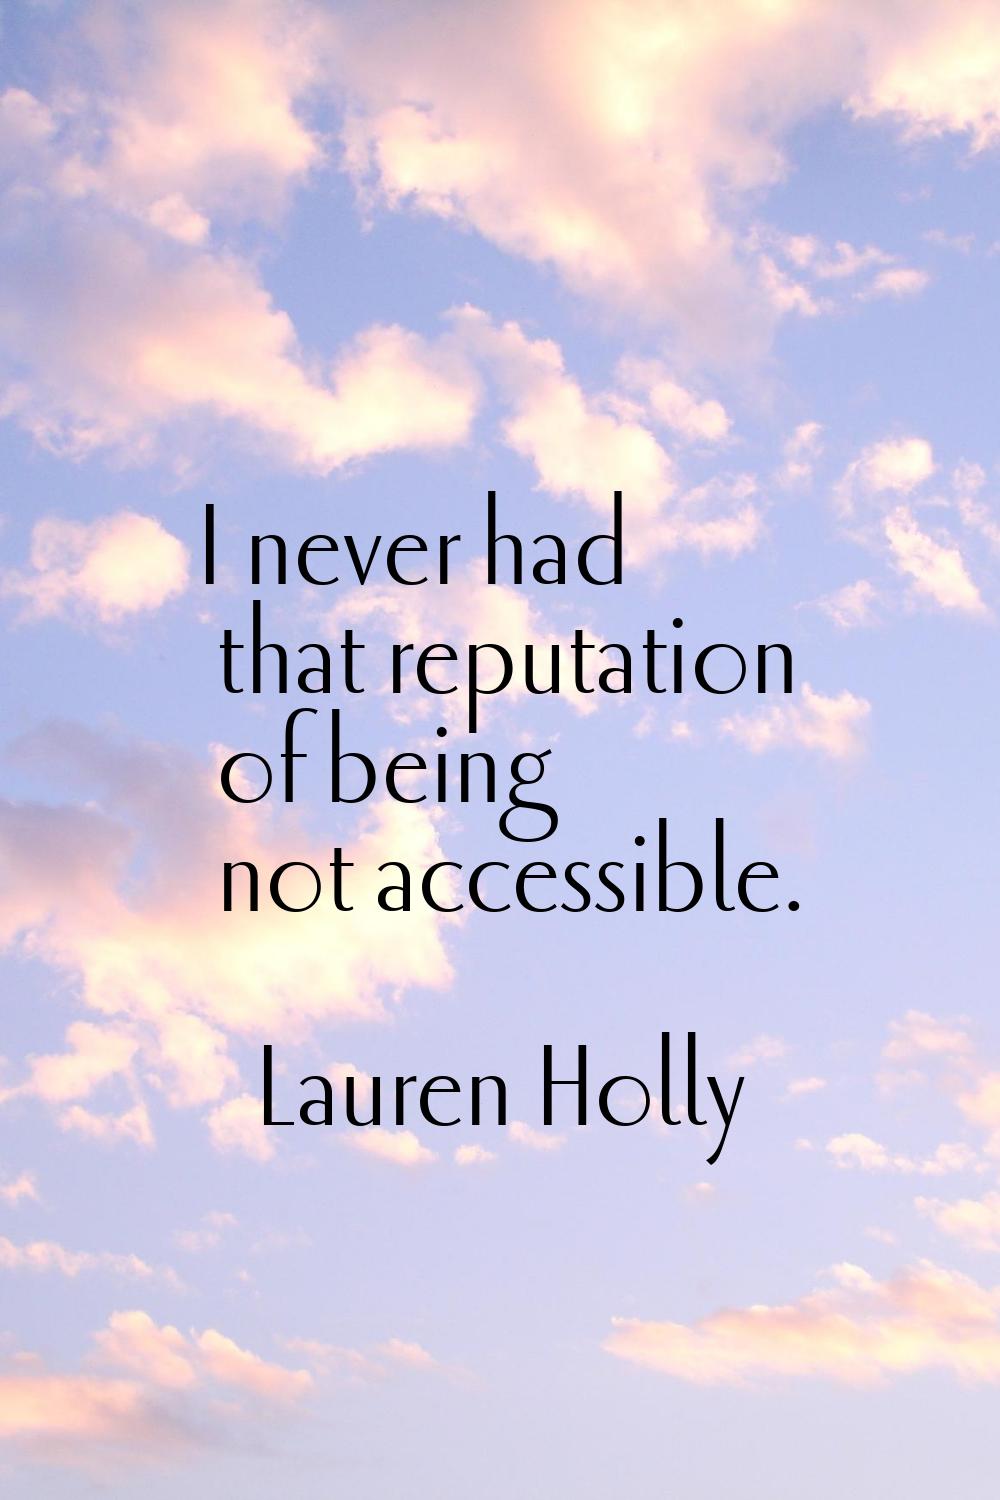 I never had that reputation of being not accessible.